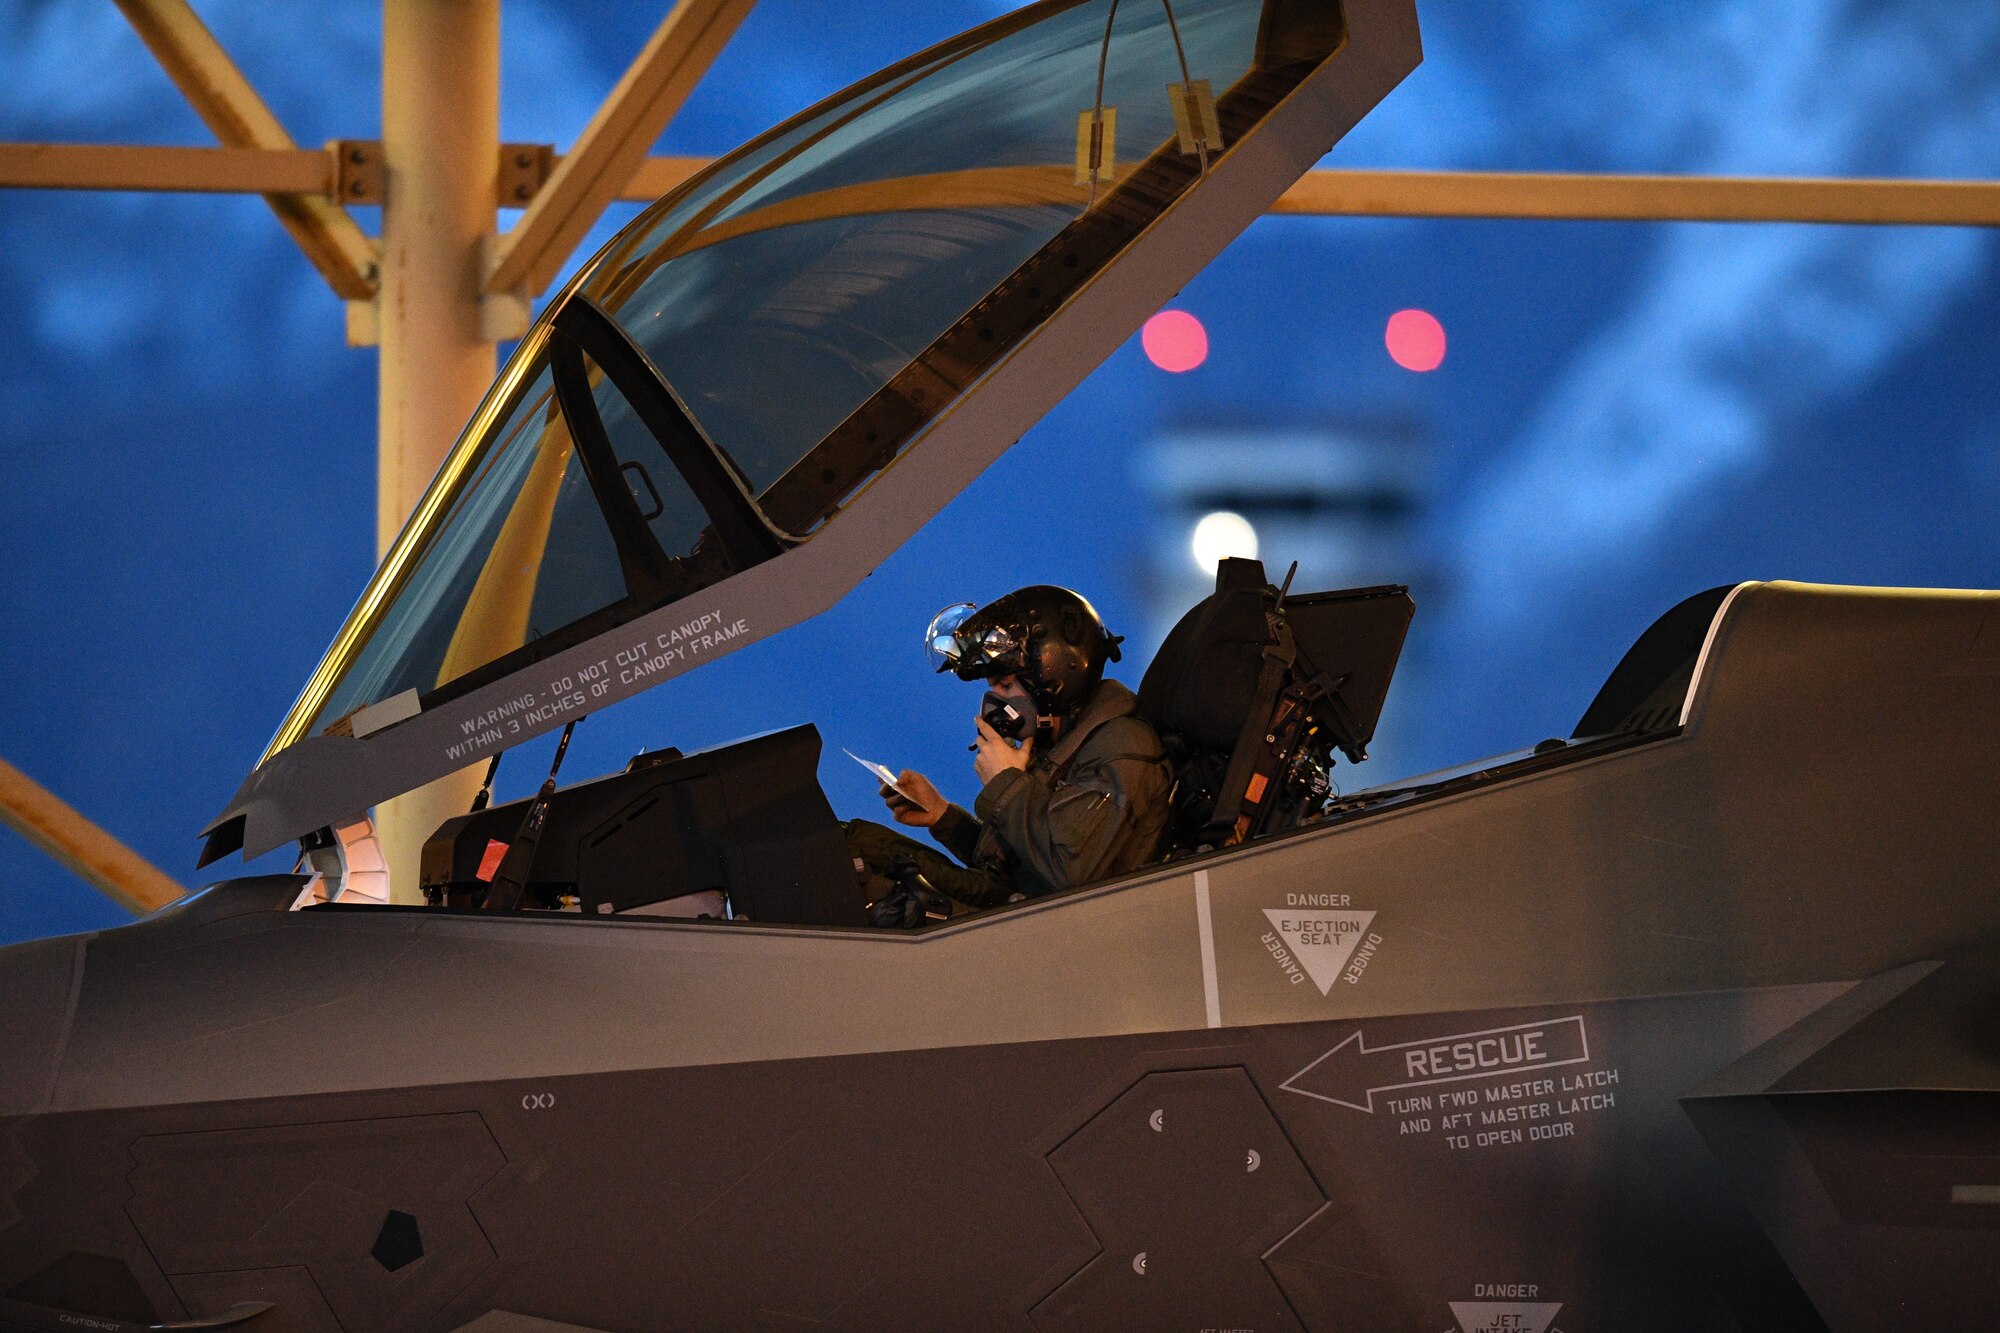 A pilot from the 388th Fighter Wing’s 421st Fighter Squadron prepares to launch an F-35A Lightning II during night flying operations at Hill Air Force Base, Utah, March 26, 2019. Night flying is required for pilots to sharpen their combat skills. The 388th Fighter Wing is the Air Force’s first combat-coded F-35A wing. (U.S. Air Force photo by R. Nial Bradshaw)